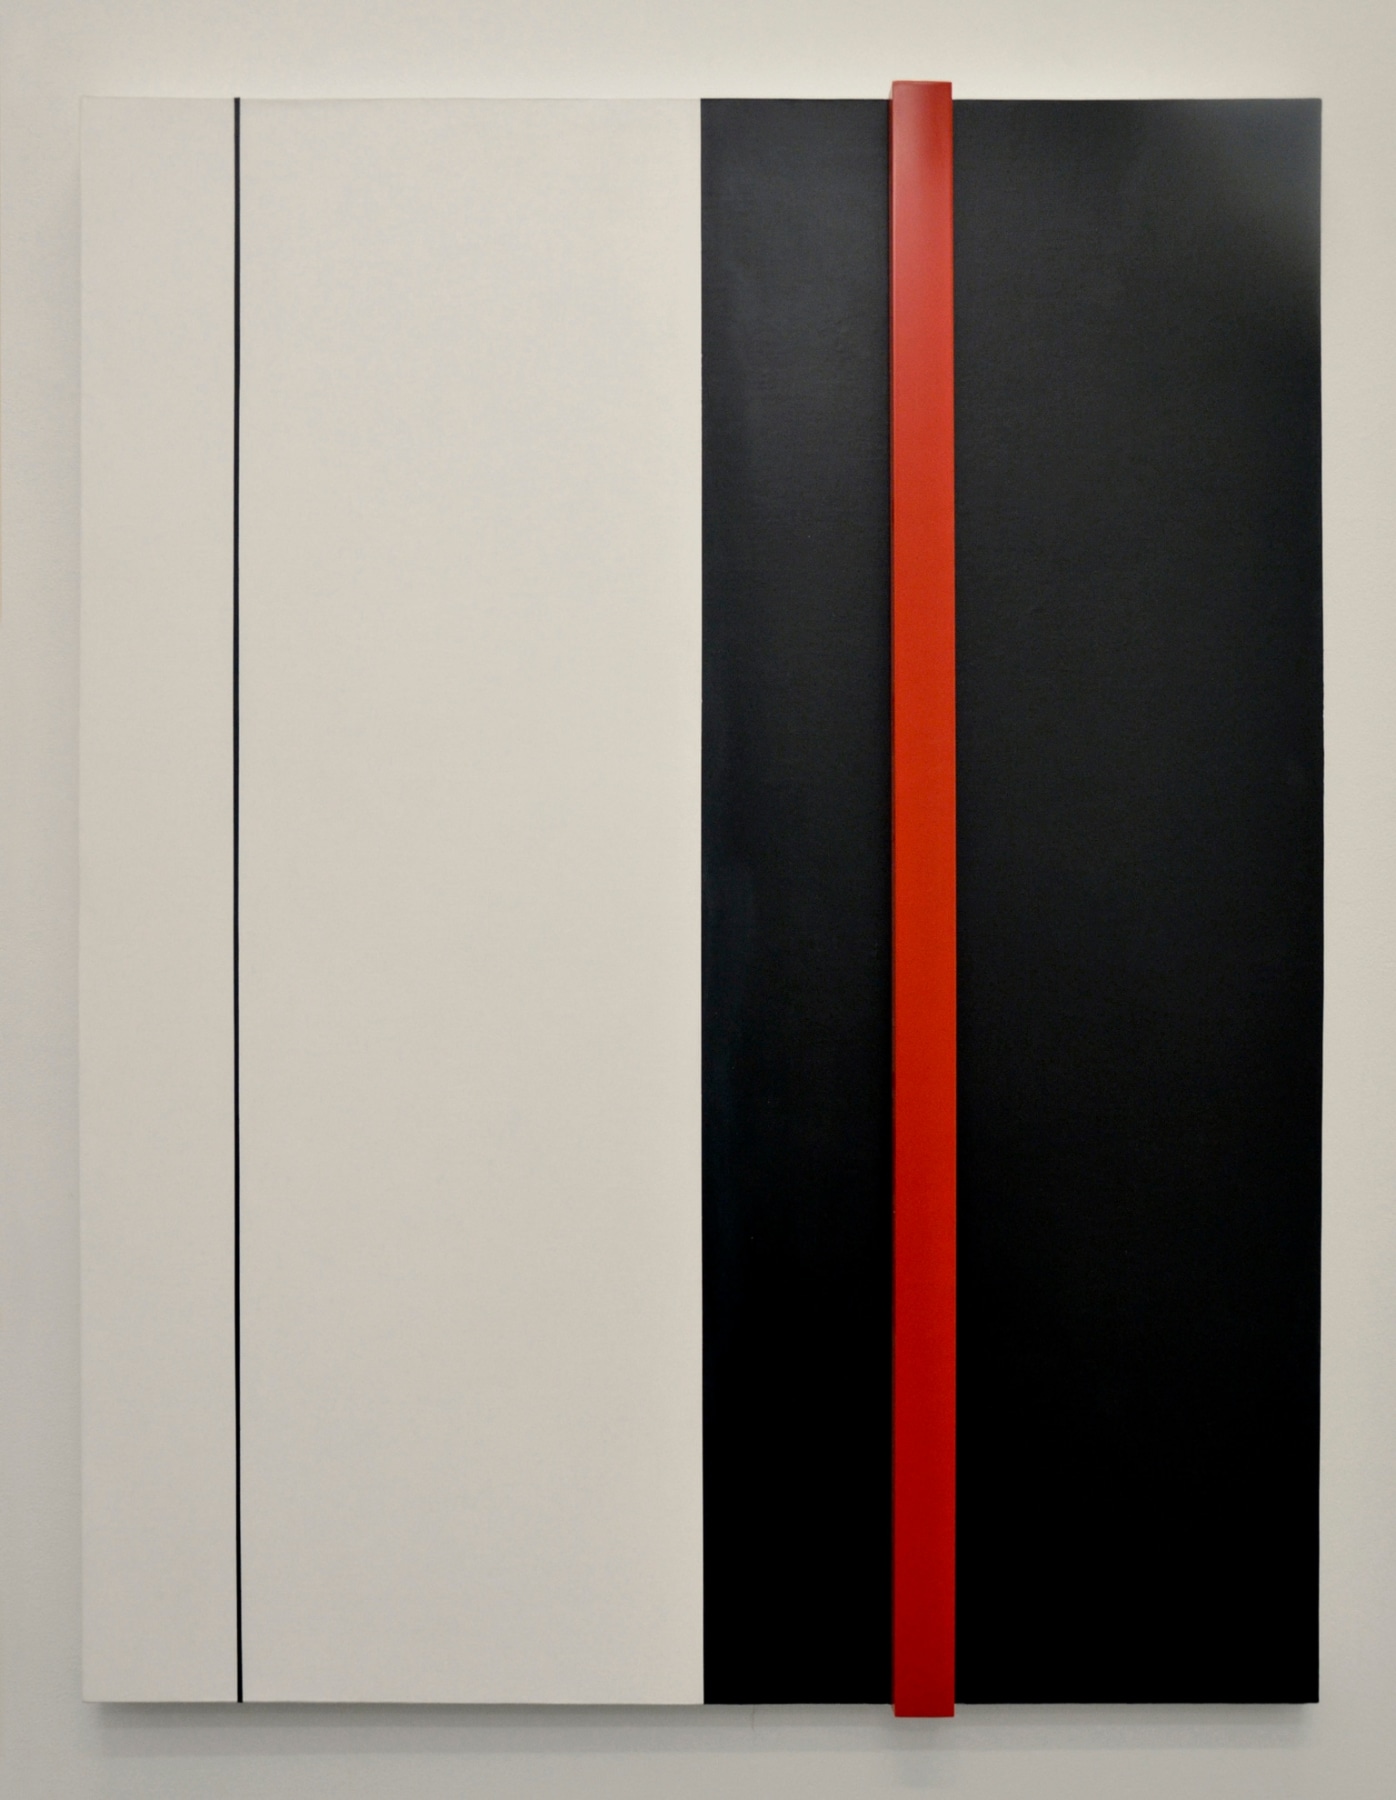 Cui_Xiuwen_Reincarnation_No.3_Varnished_Aluminum_and_Acrylic_on_Canvas_105x135cm_ 2014